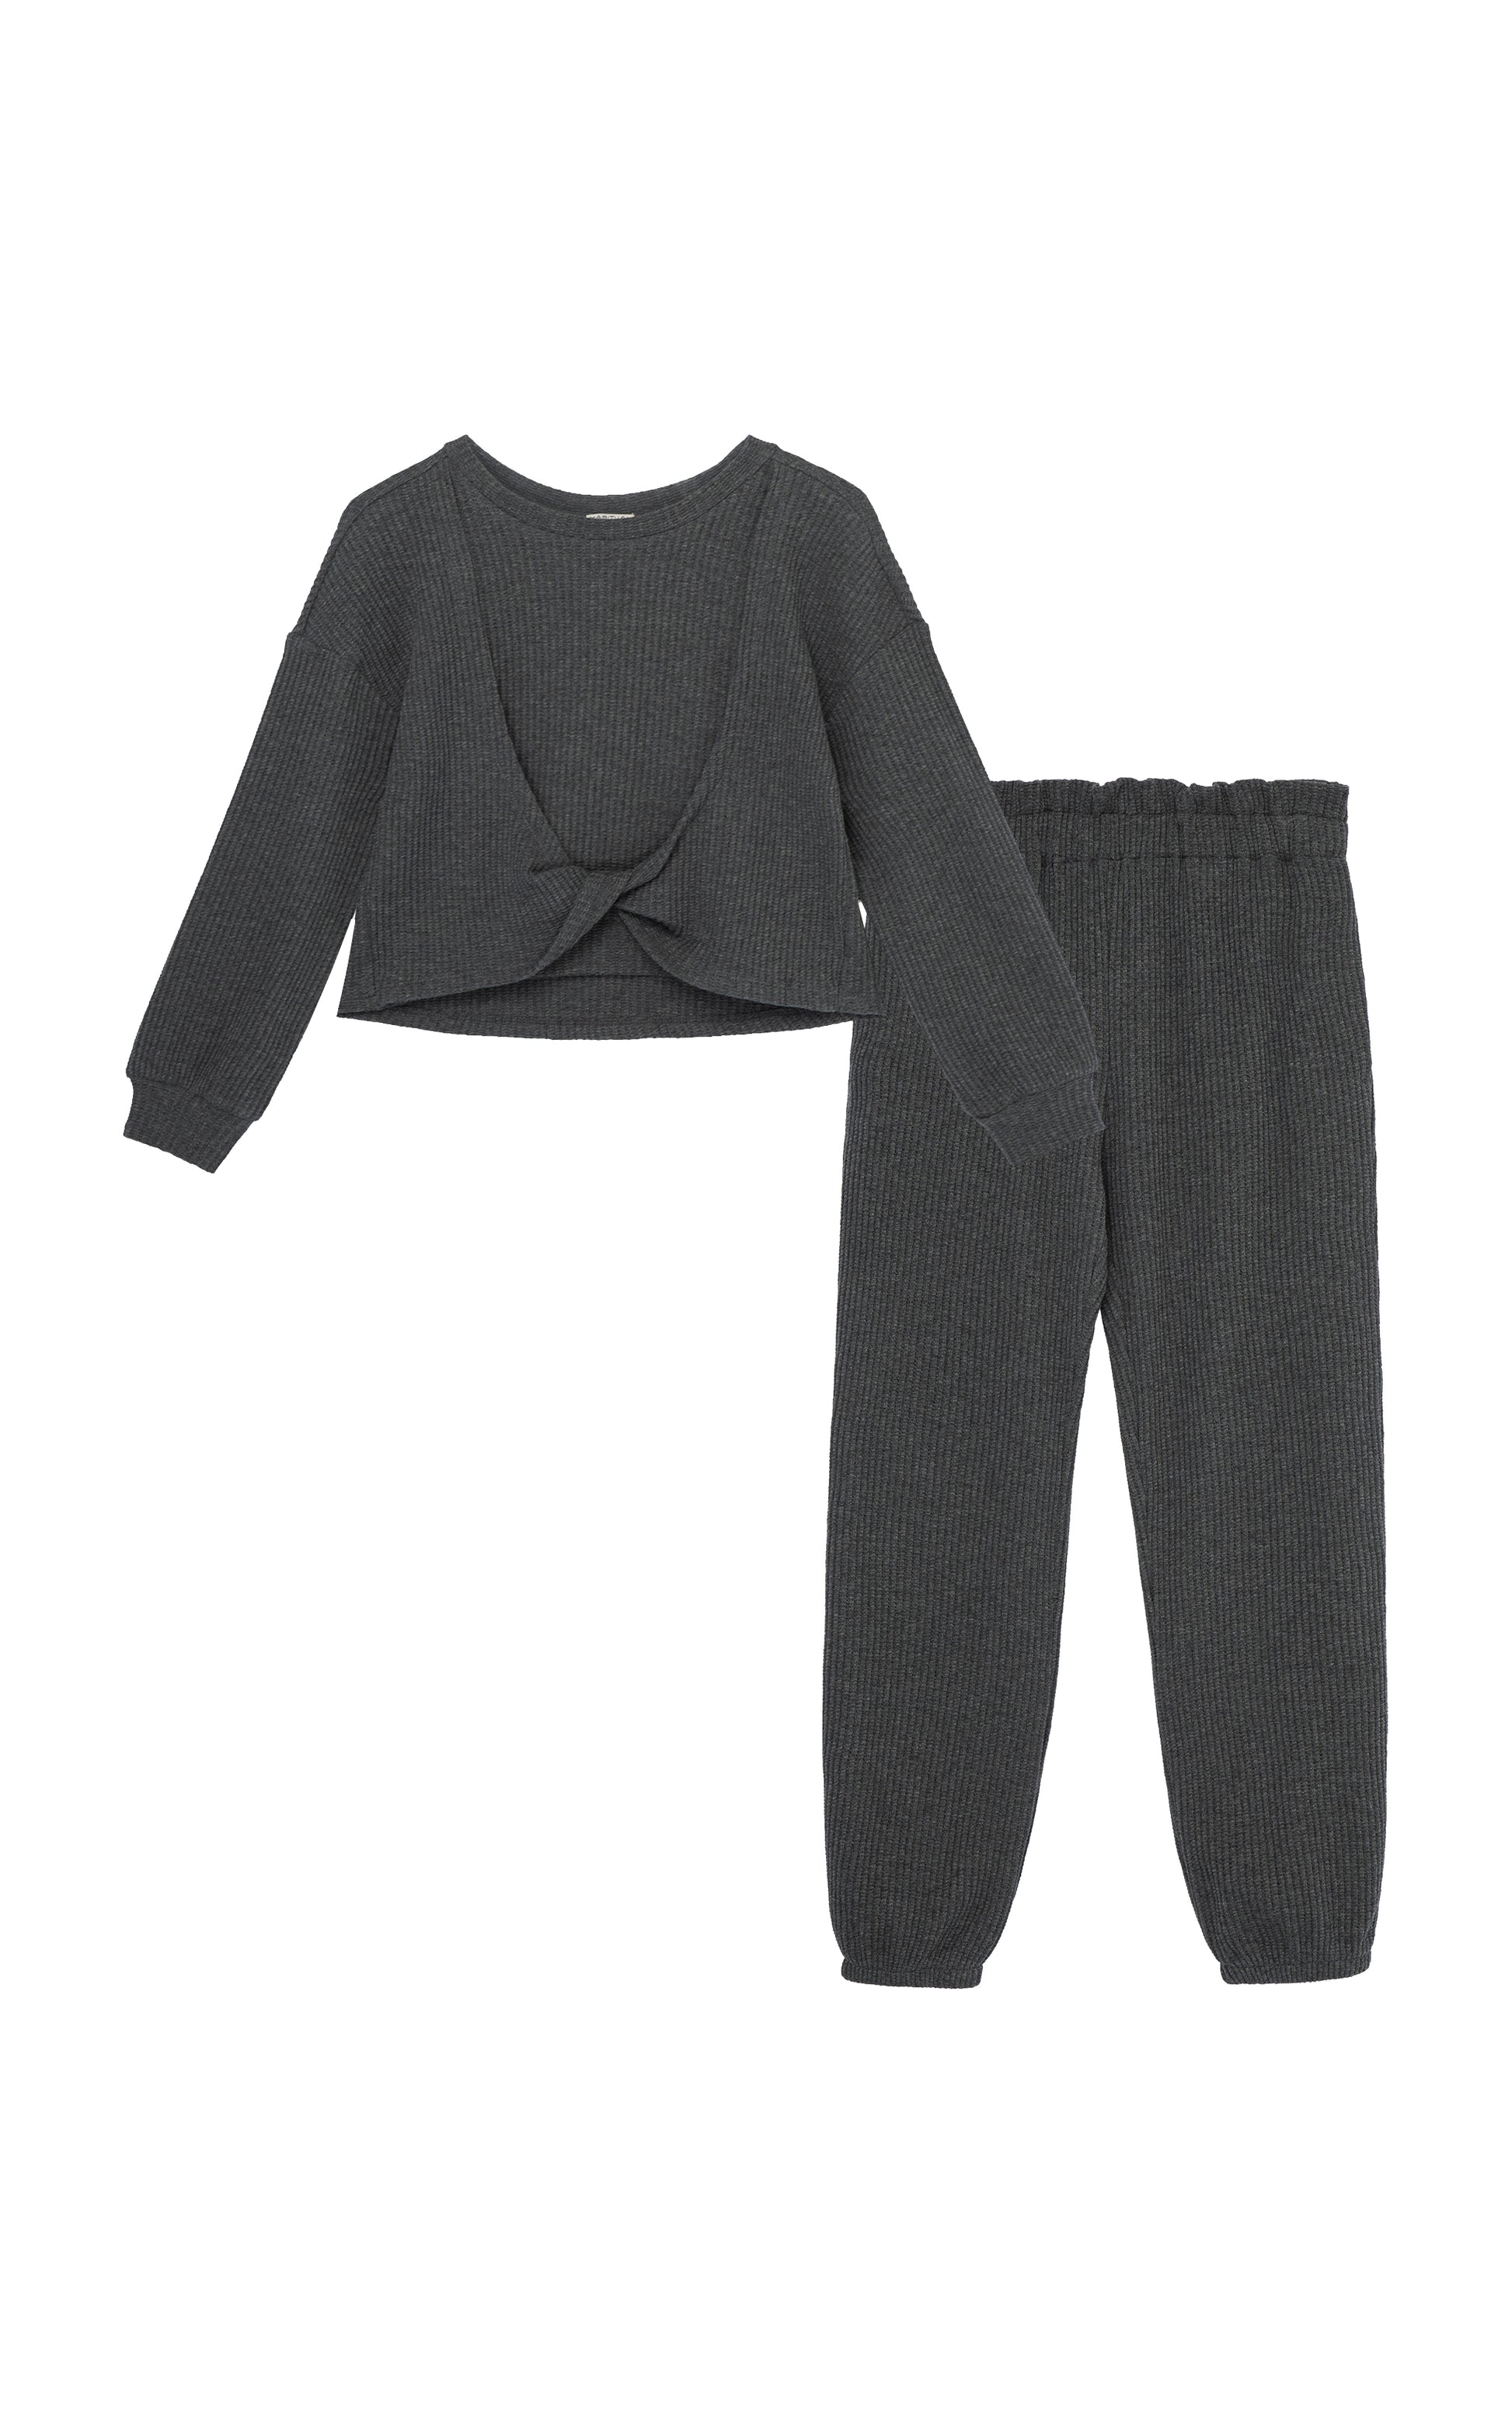 DARK GREY  WAFFLE KNIT SWEATER WITH KNOT TWIST IN FRONT AND MATCHING SWEATPANTS